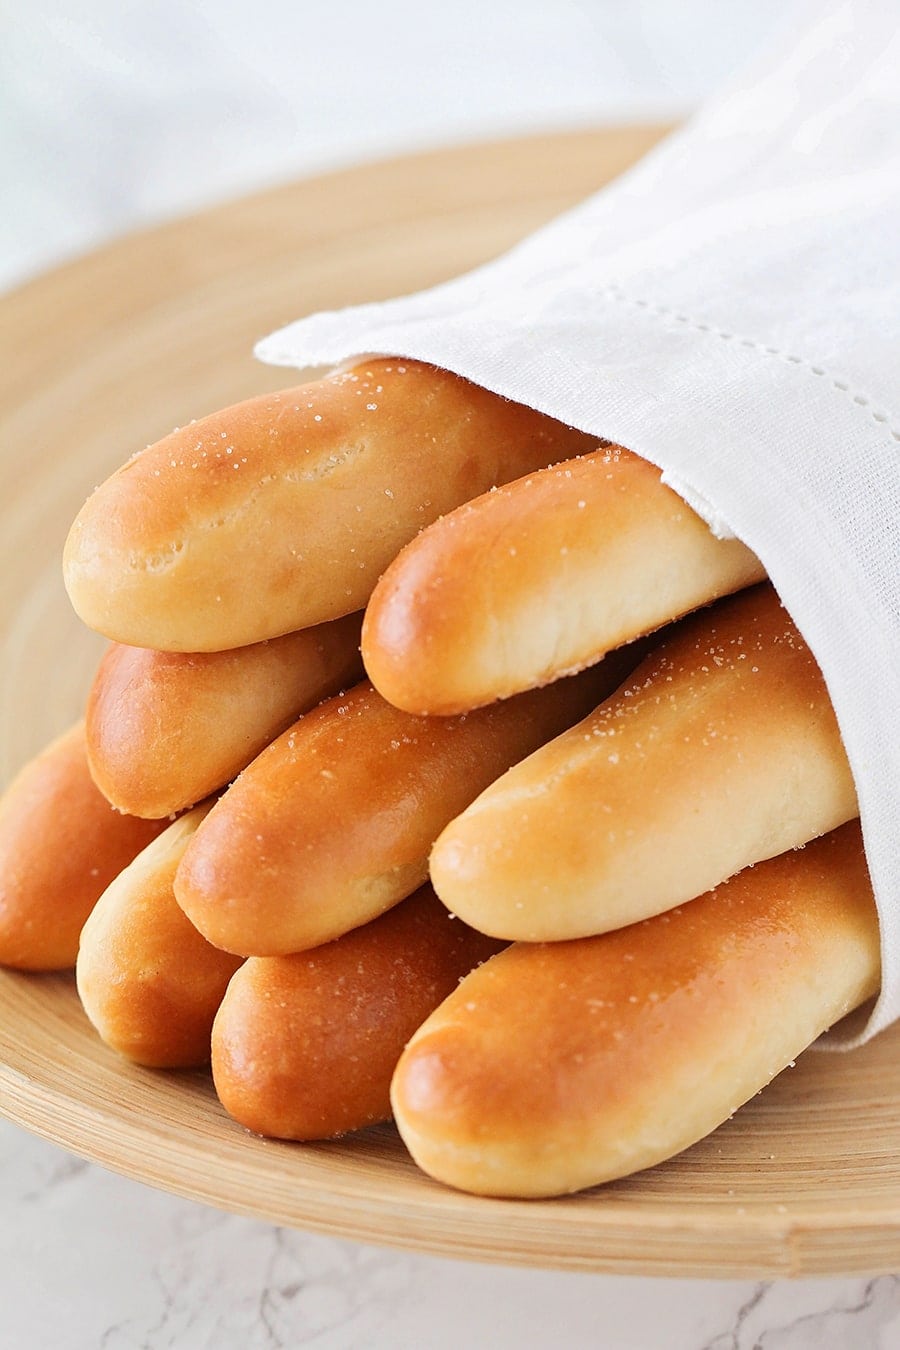 A bundle of Olive Garden breadsticks wrapped in a napkin.